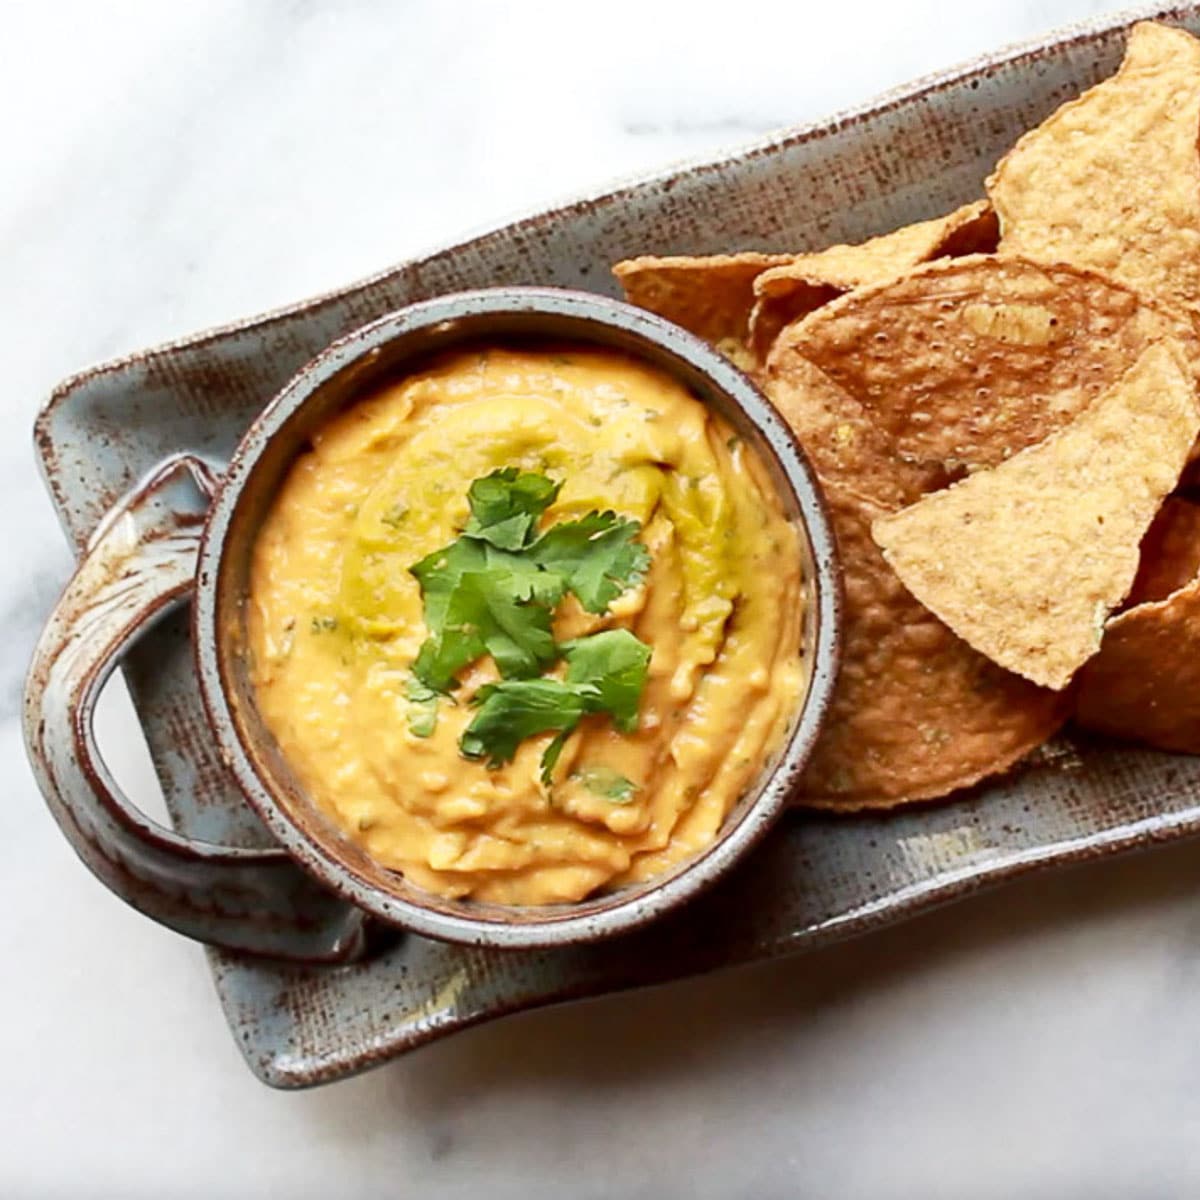 roasted thai butternut squash dip in a gray bowl on top of a gray serving platter with tortilla chips on the side on top of a marble surface